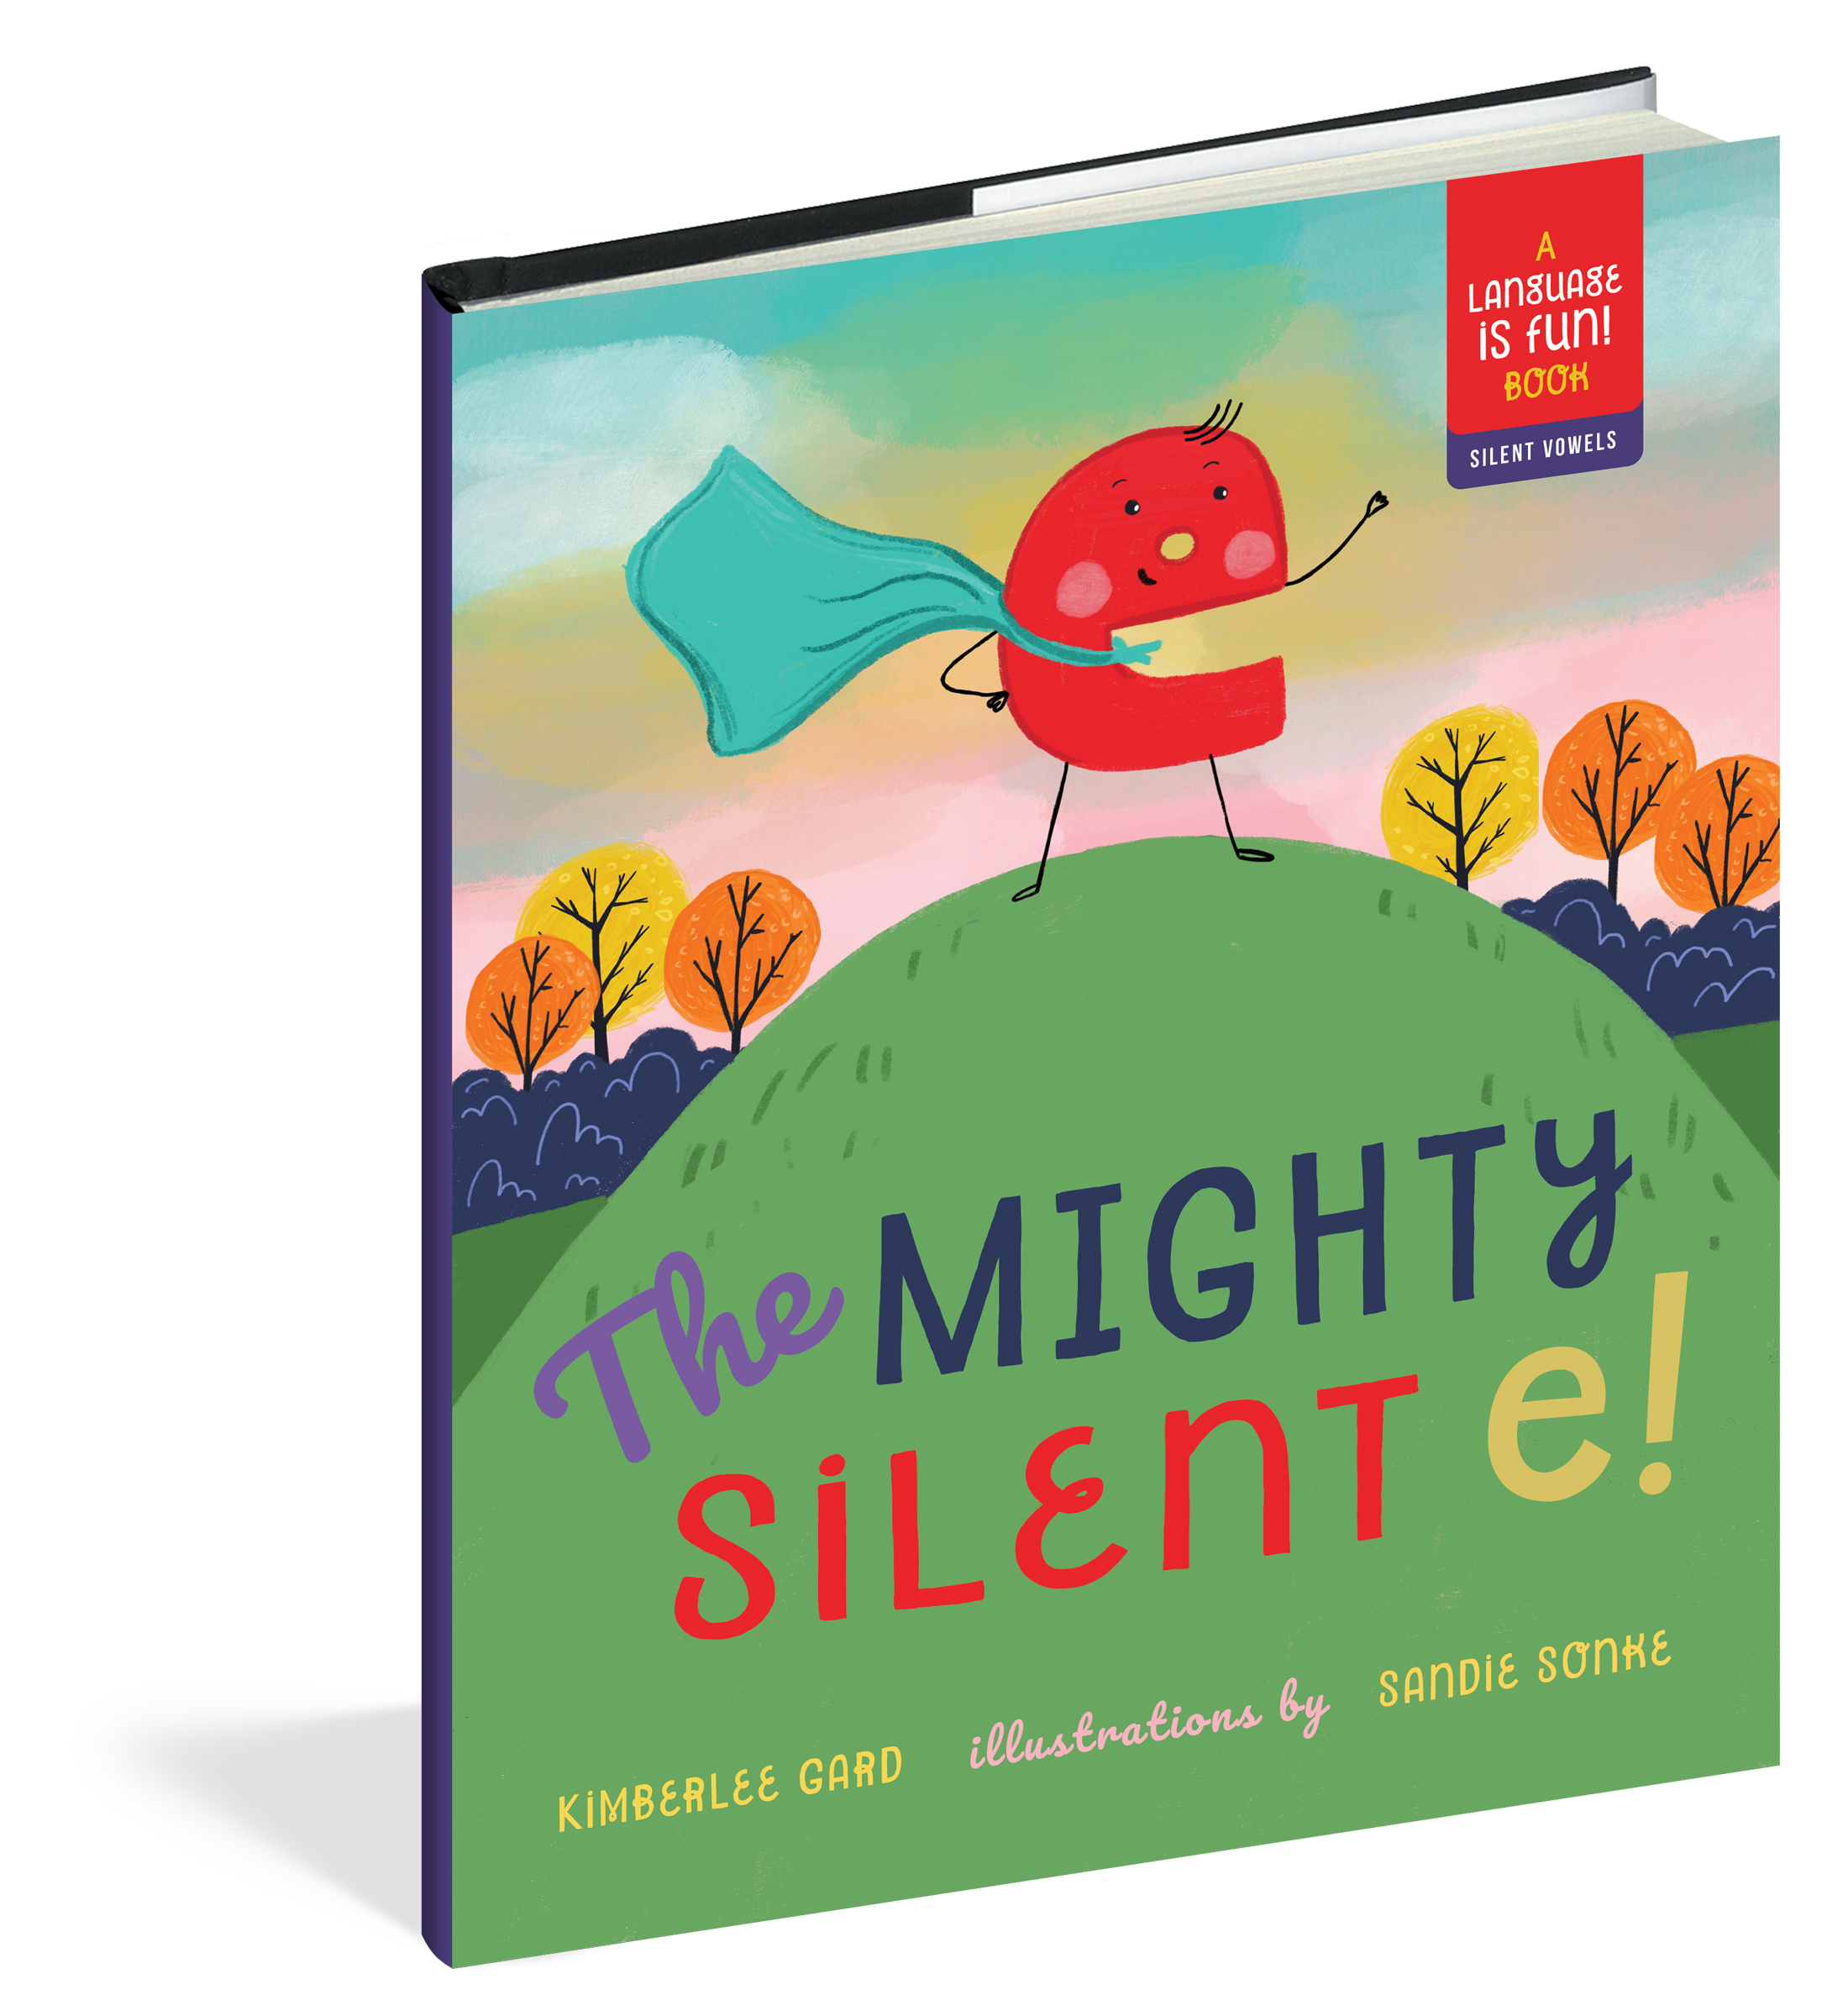 The cover of the picture book The Mighty Silent e!